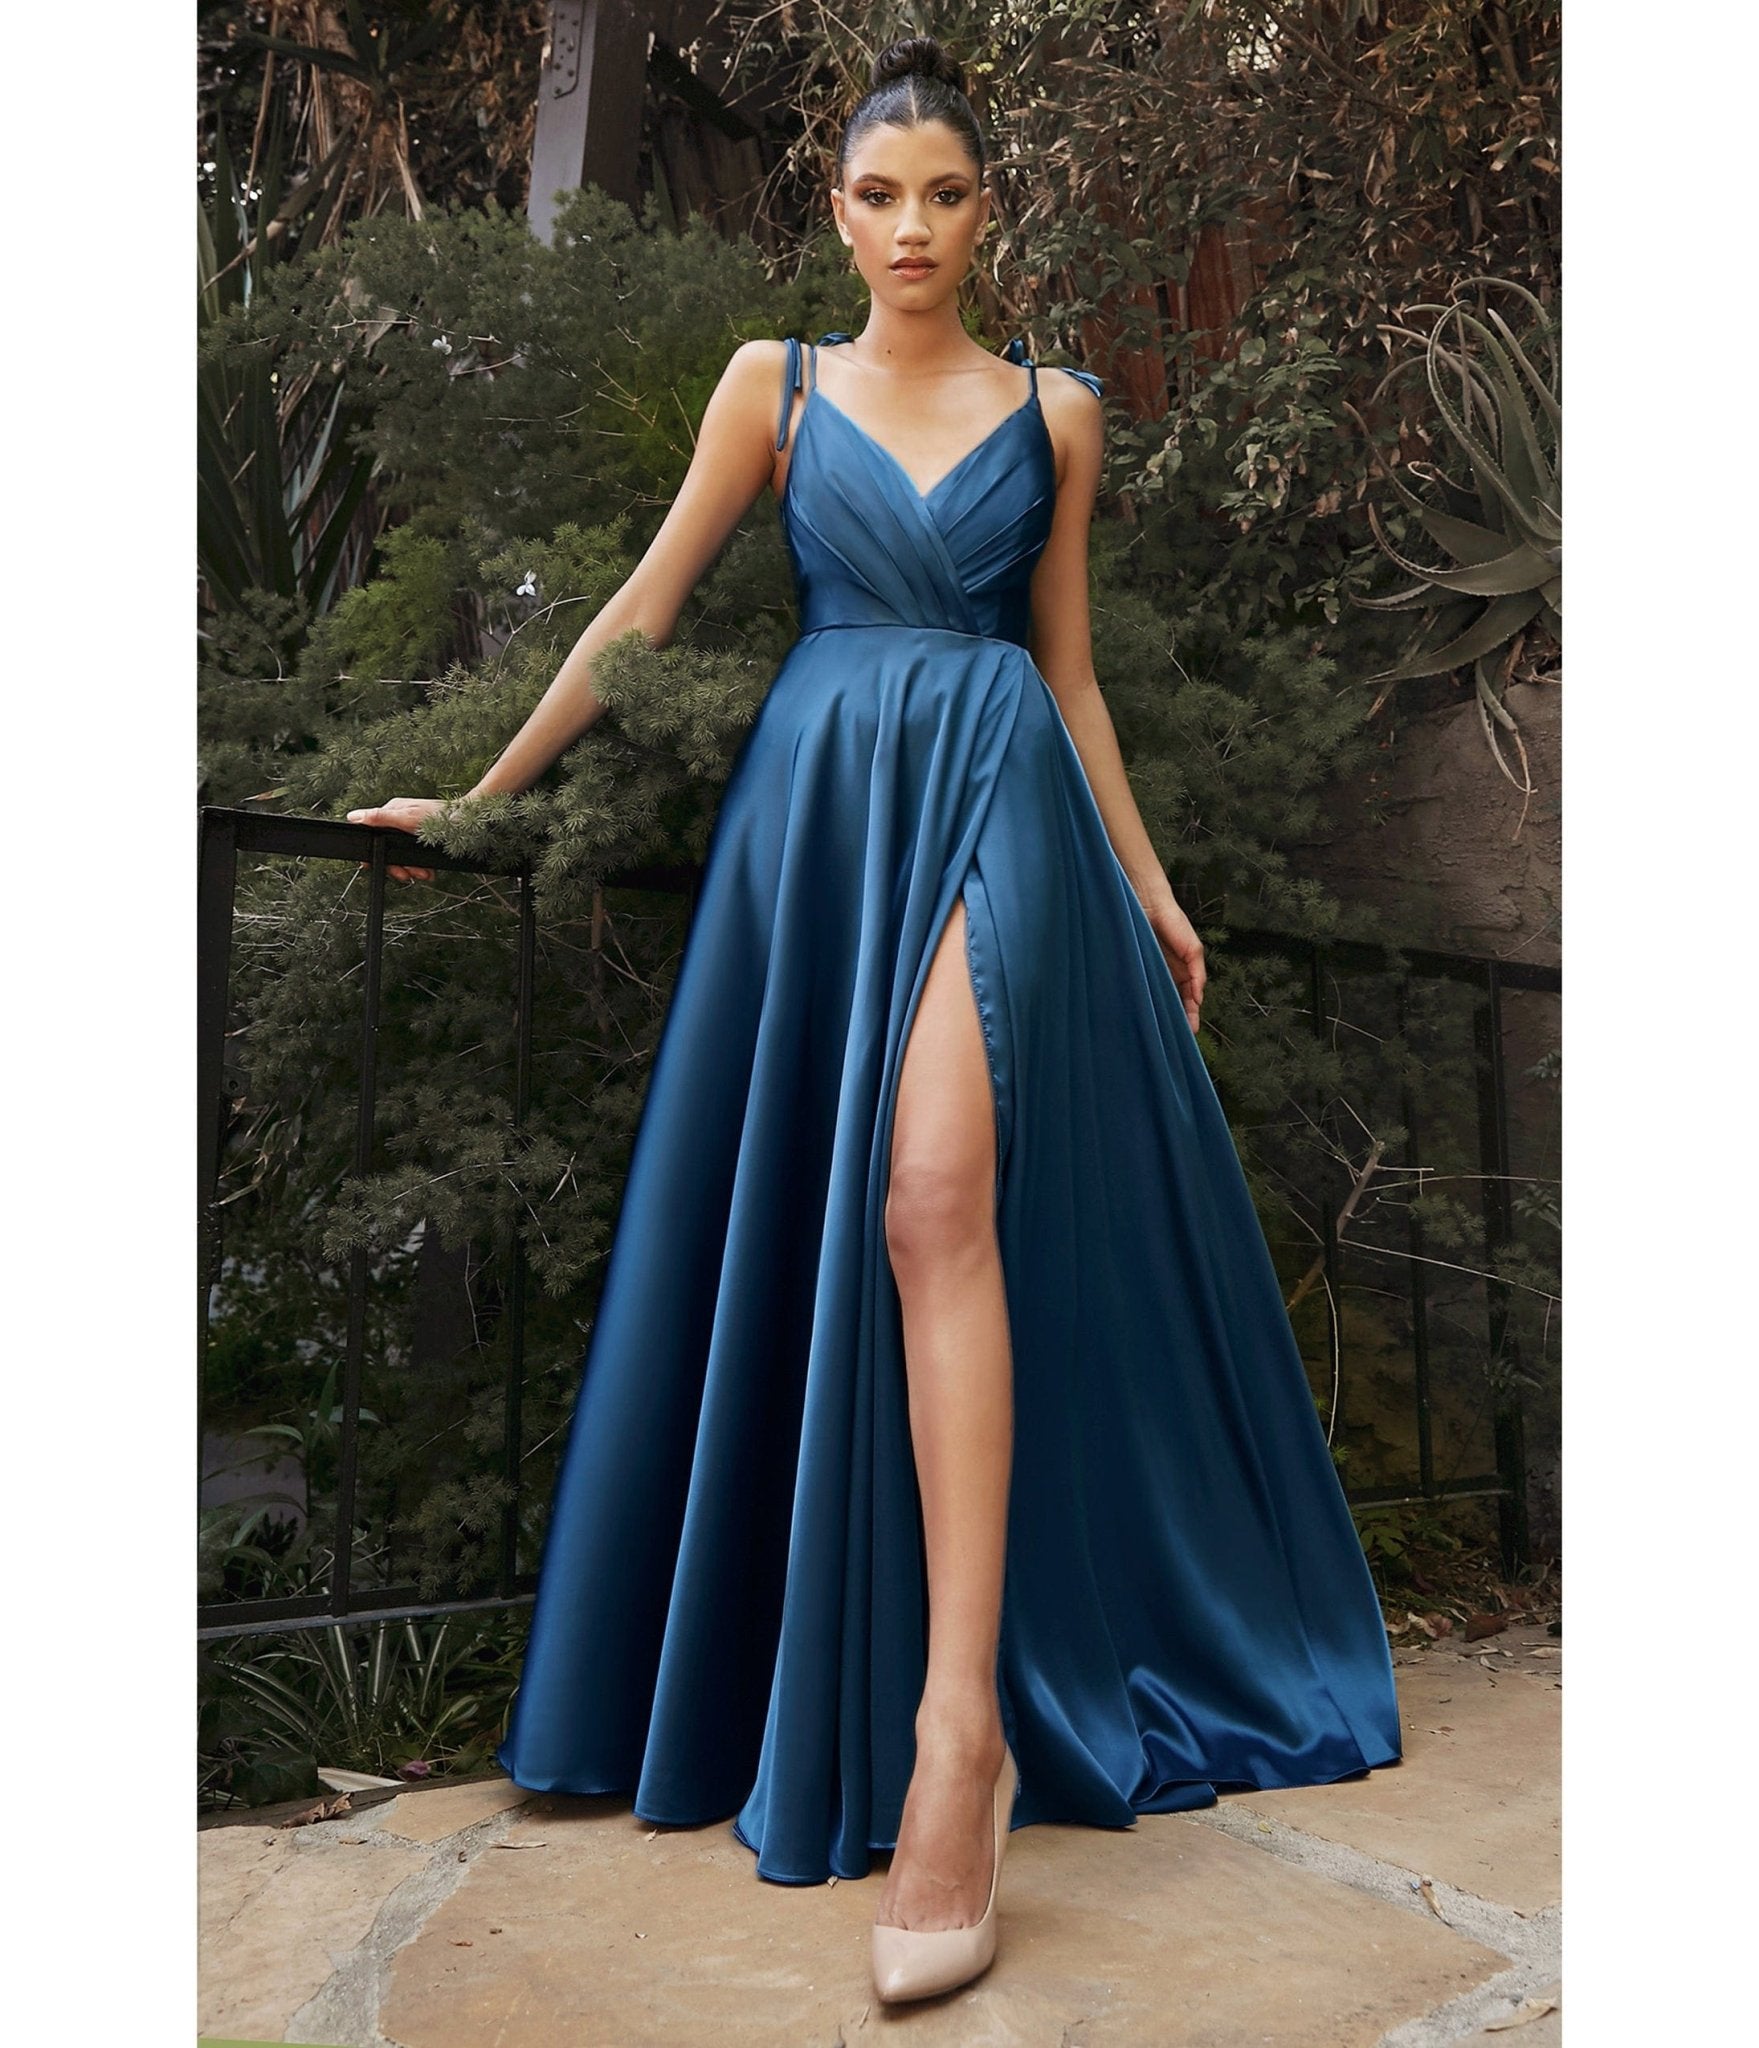 Retro & Vintage French Navy Flowy Satin A-Line Bridesmaid Gown